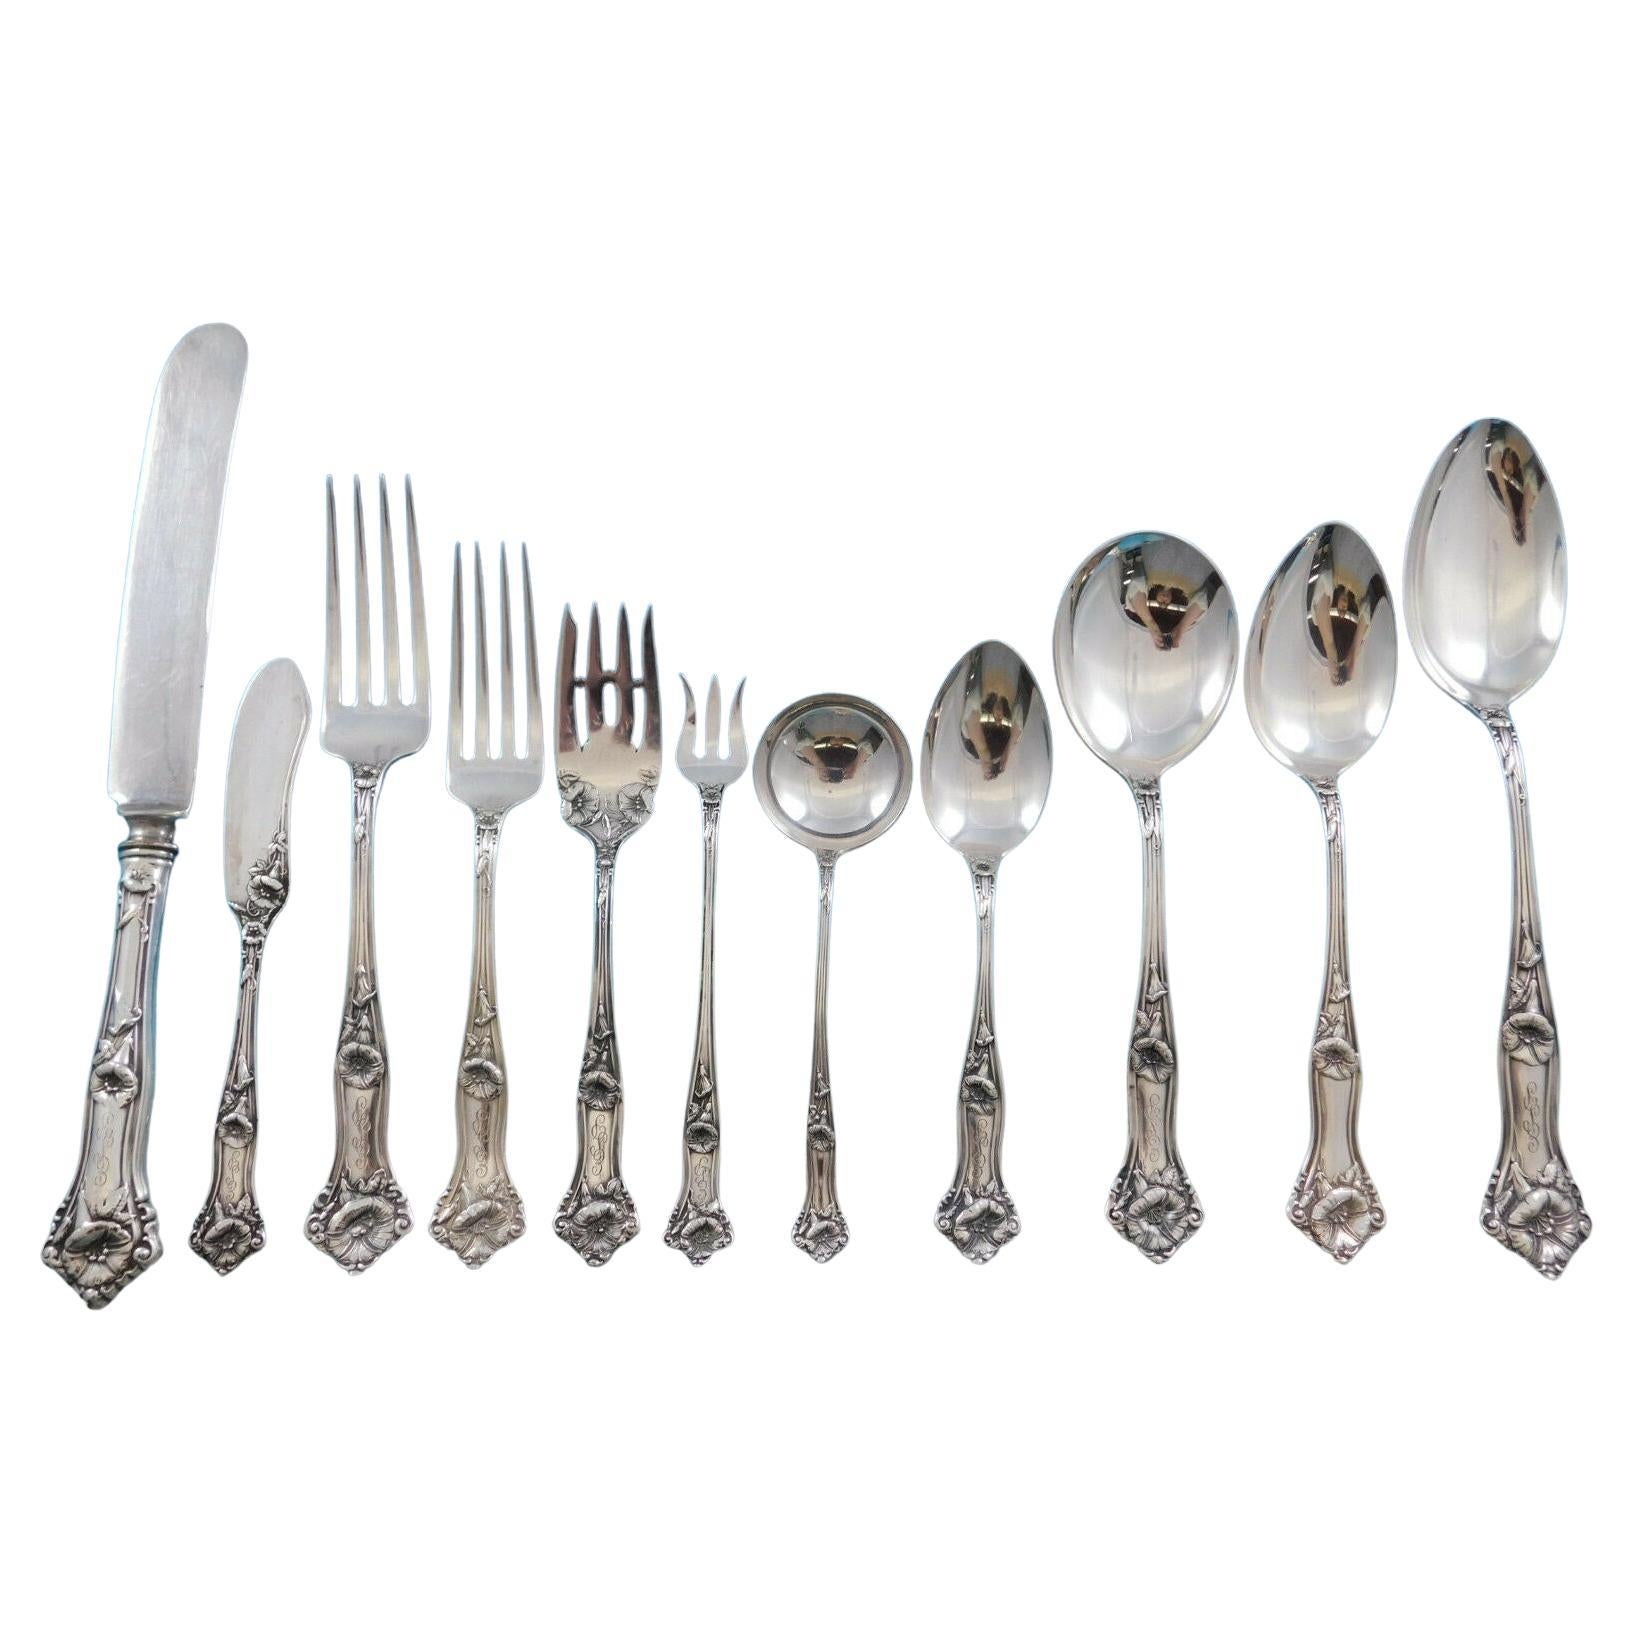 Morning Glory by Alvin Sterling Silver Flatware Set for 12 Service 100 Pc Dinner